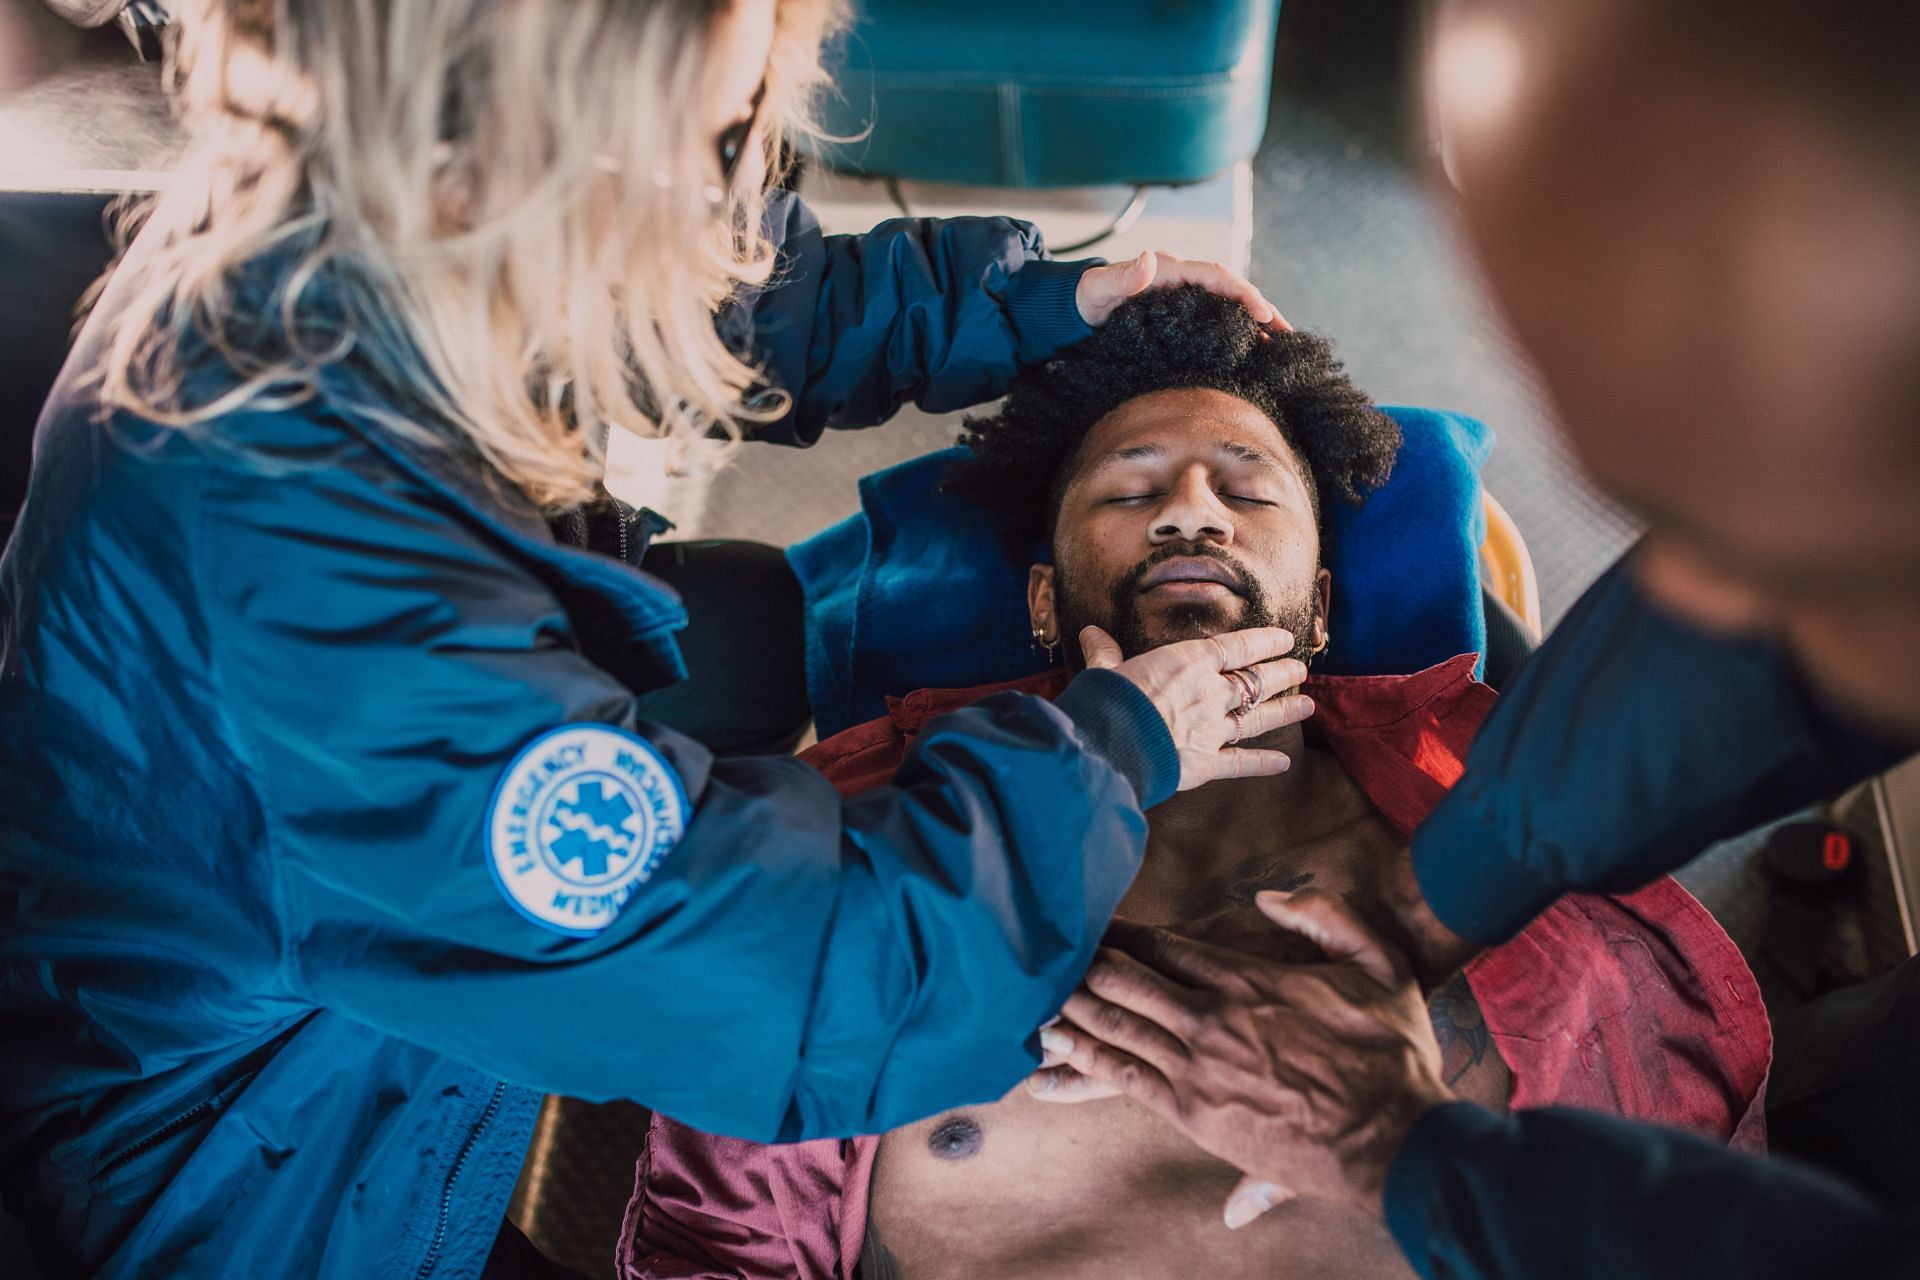 Emergency medical personnel will work to restore the breathing and heart rate of the person with exercise-induced anaphylaxis (Image via Pexels/Rodnae Productions)